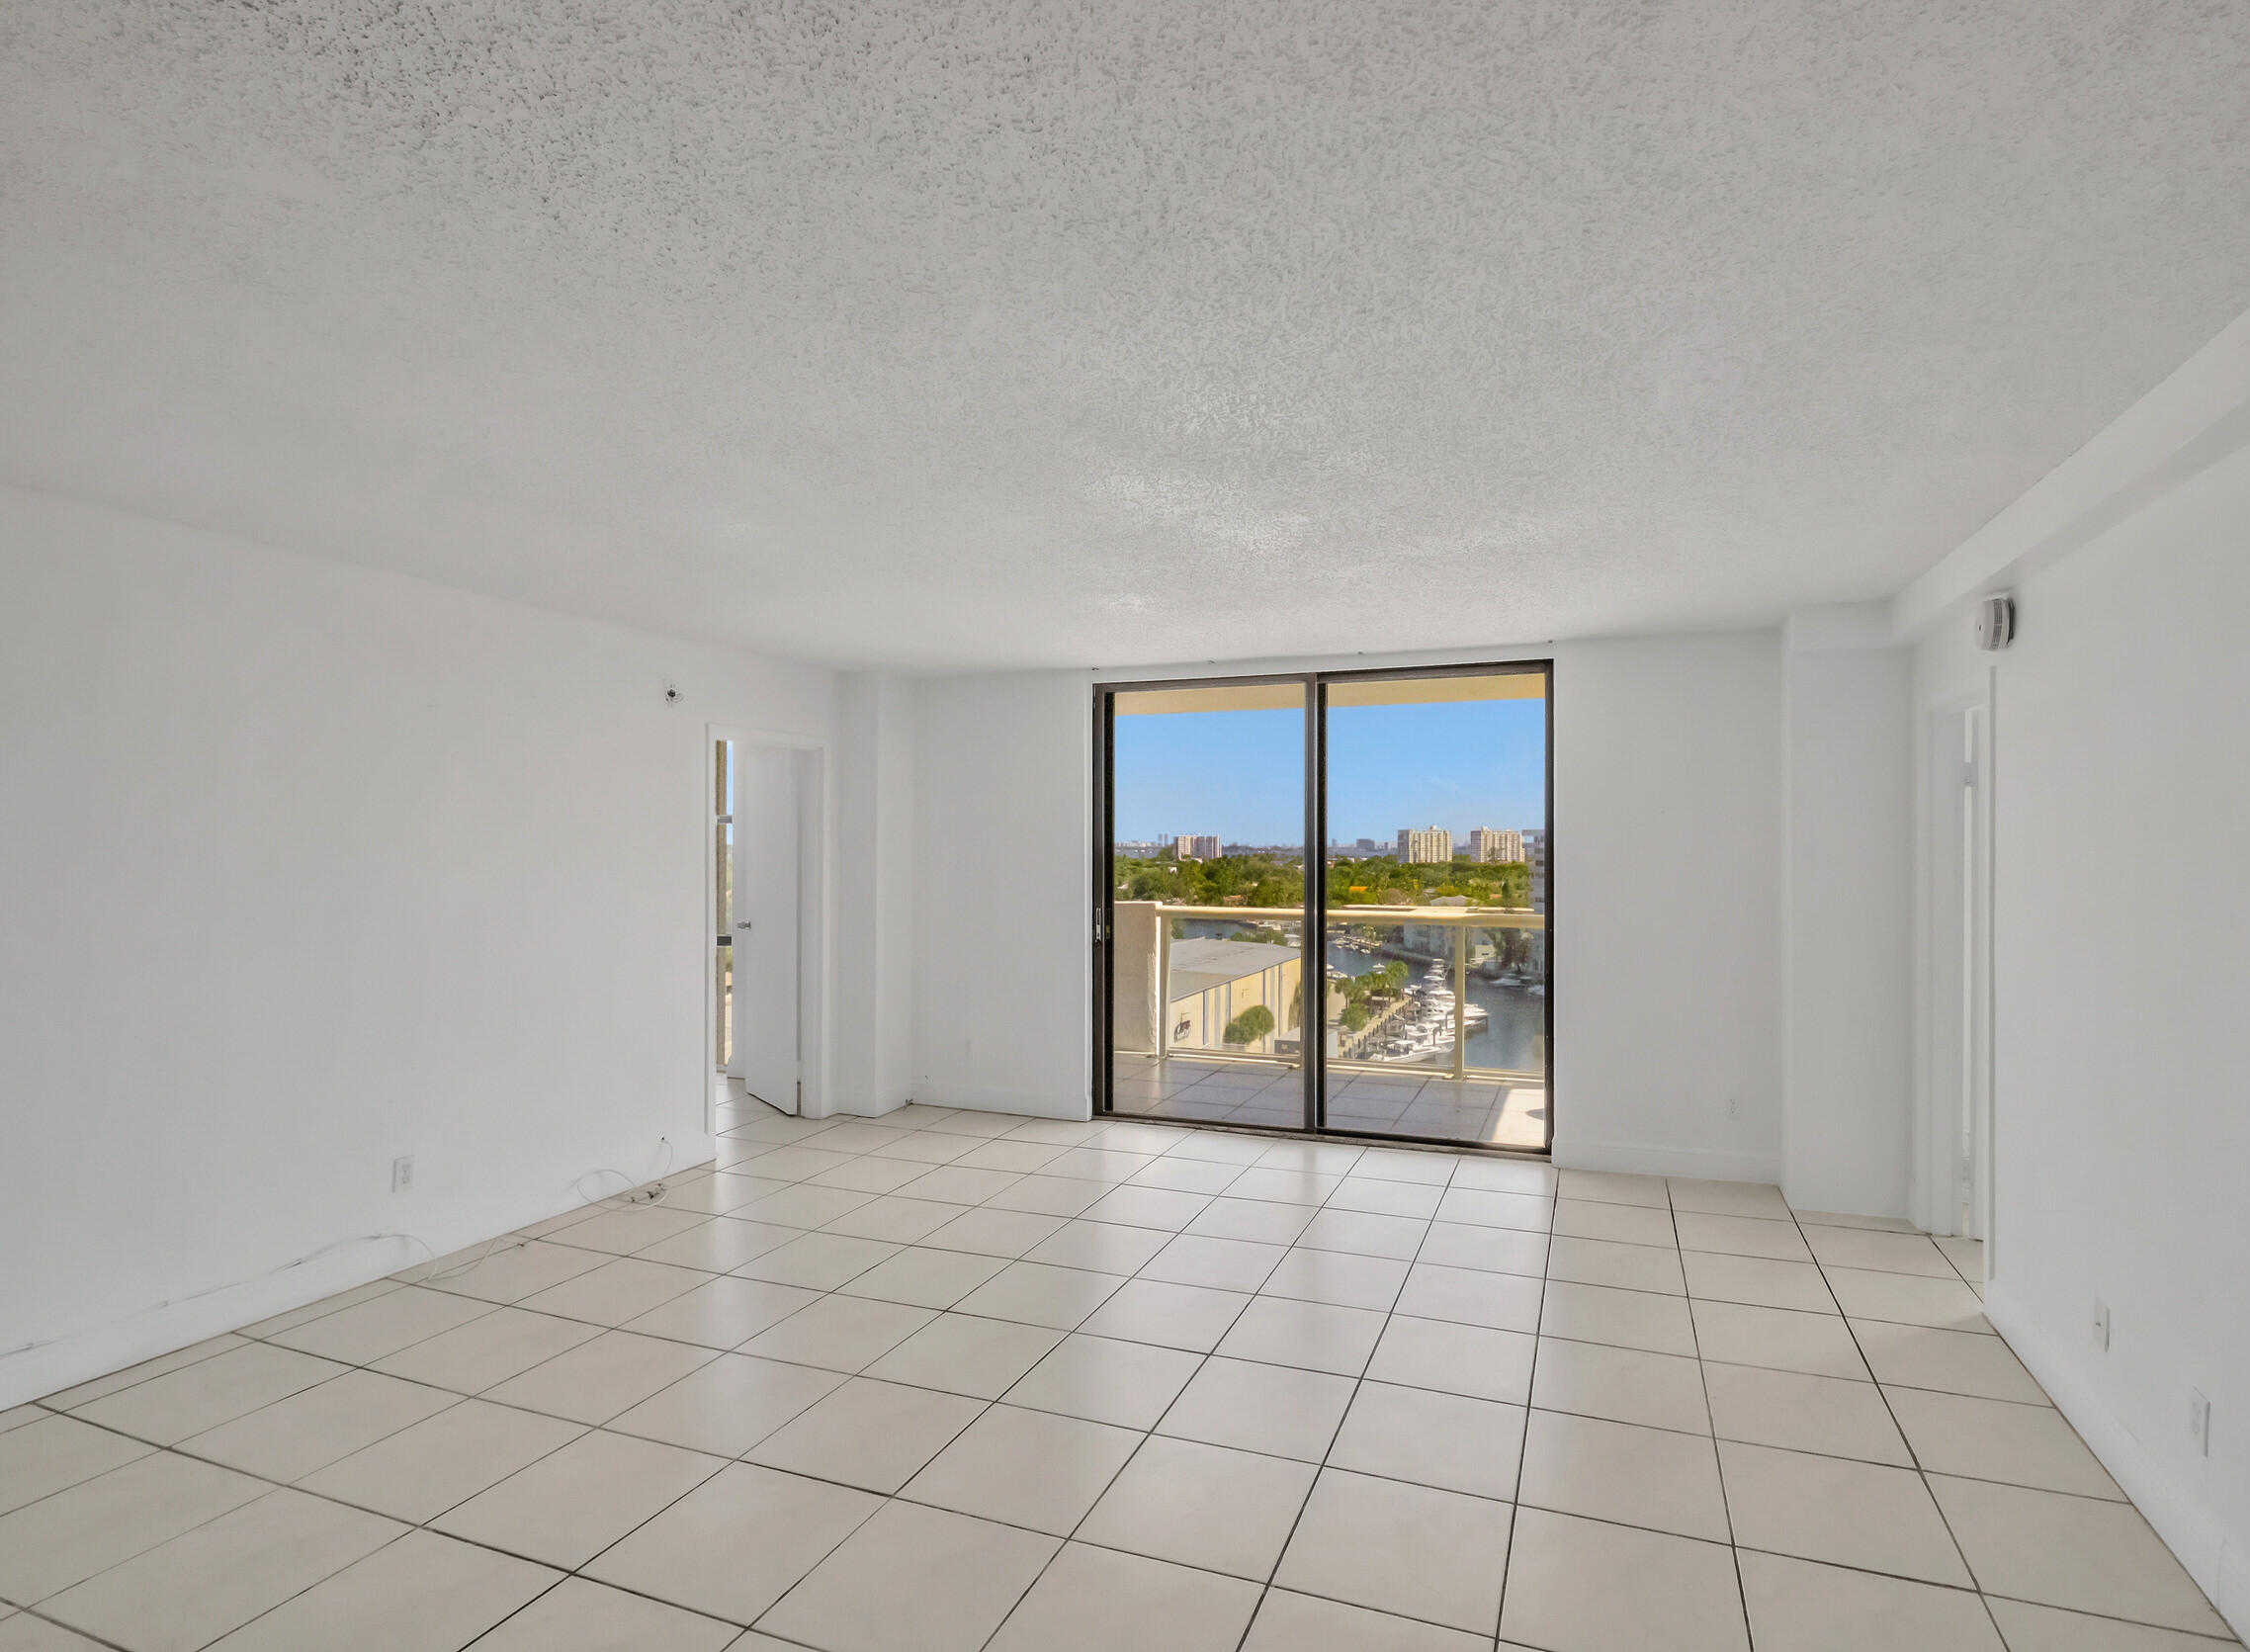 Photo 1 of 27 of 13499 Biscayne Boulevard Unit 910 residential property